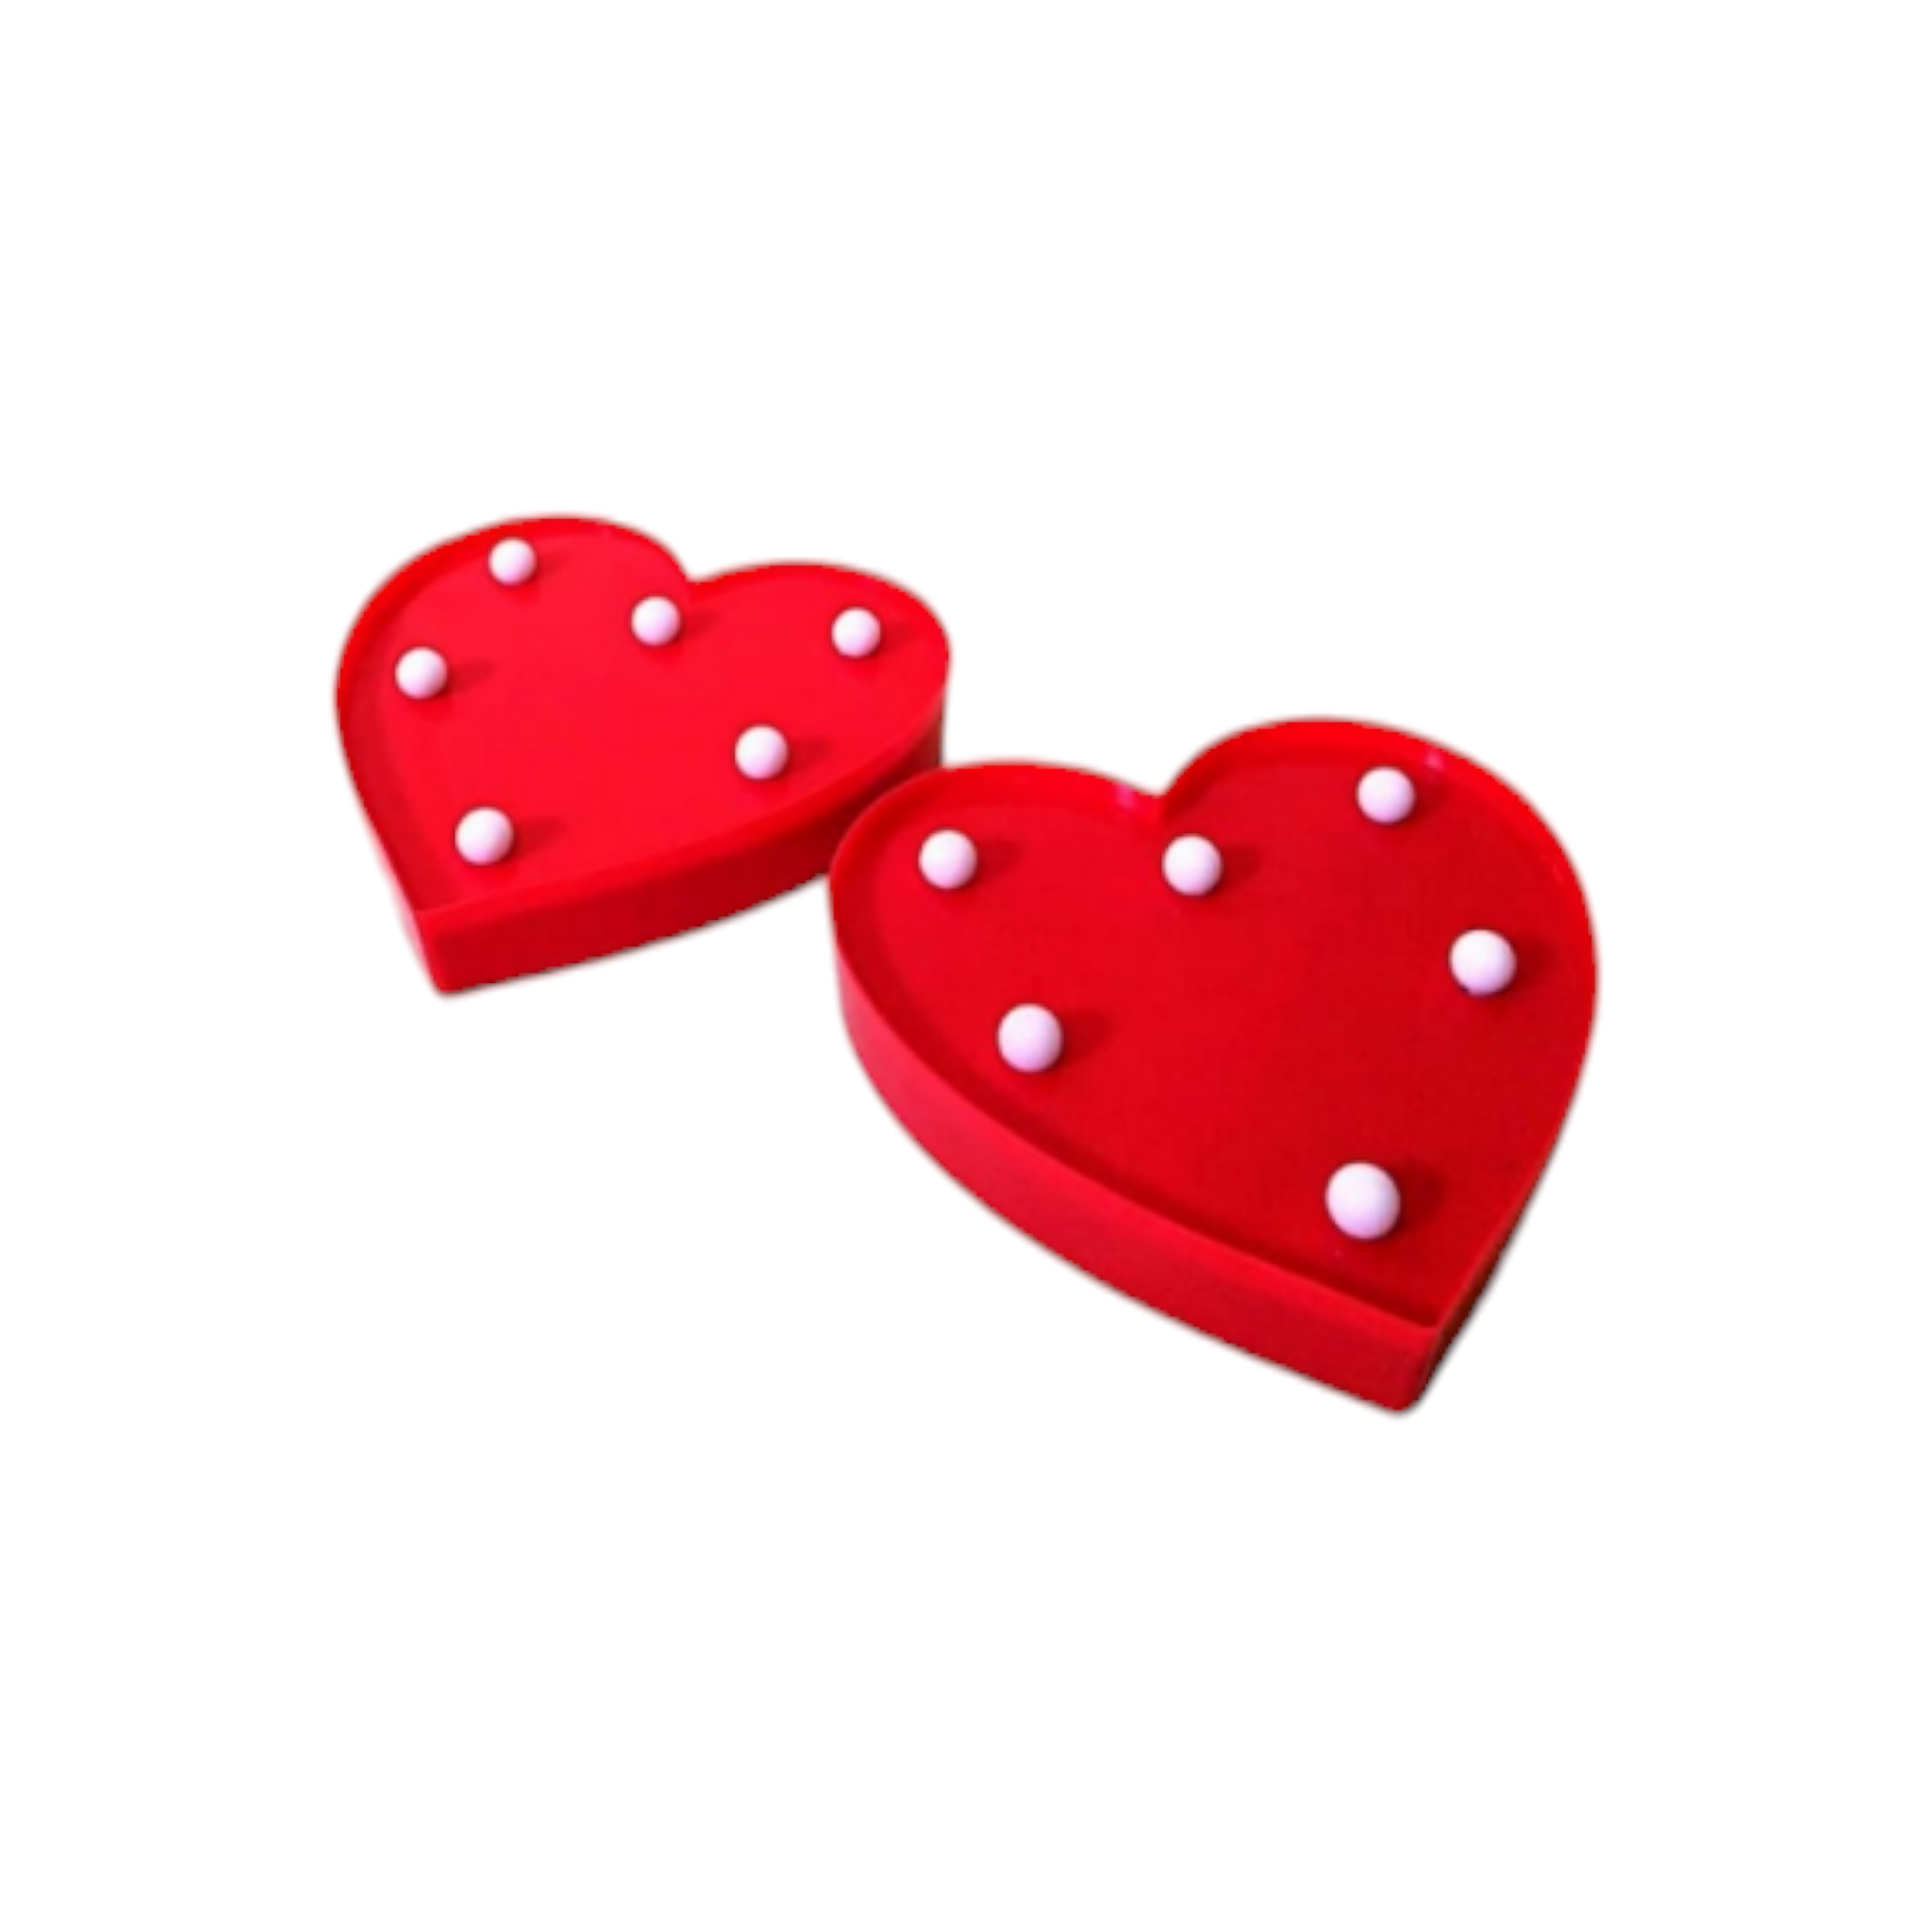 Heart Shaped LED Light Battery Operated